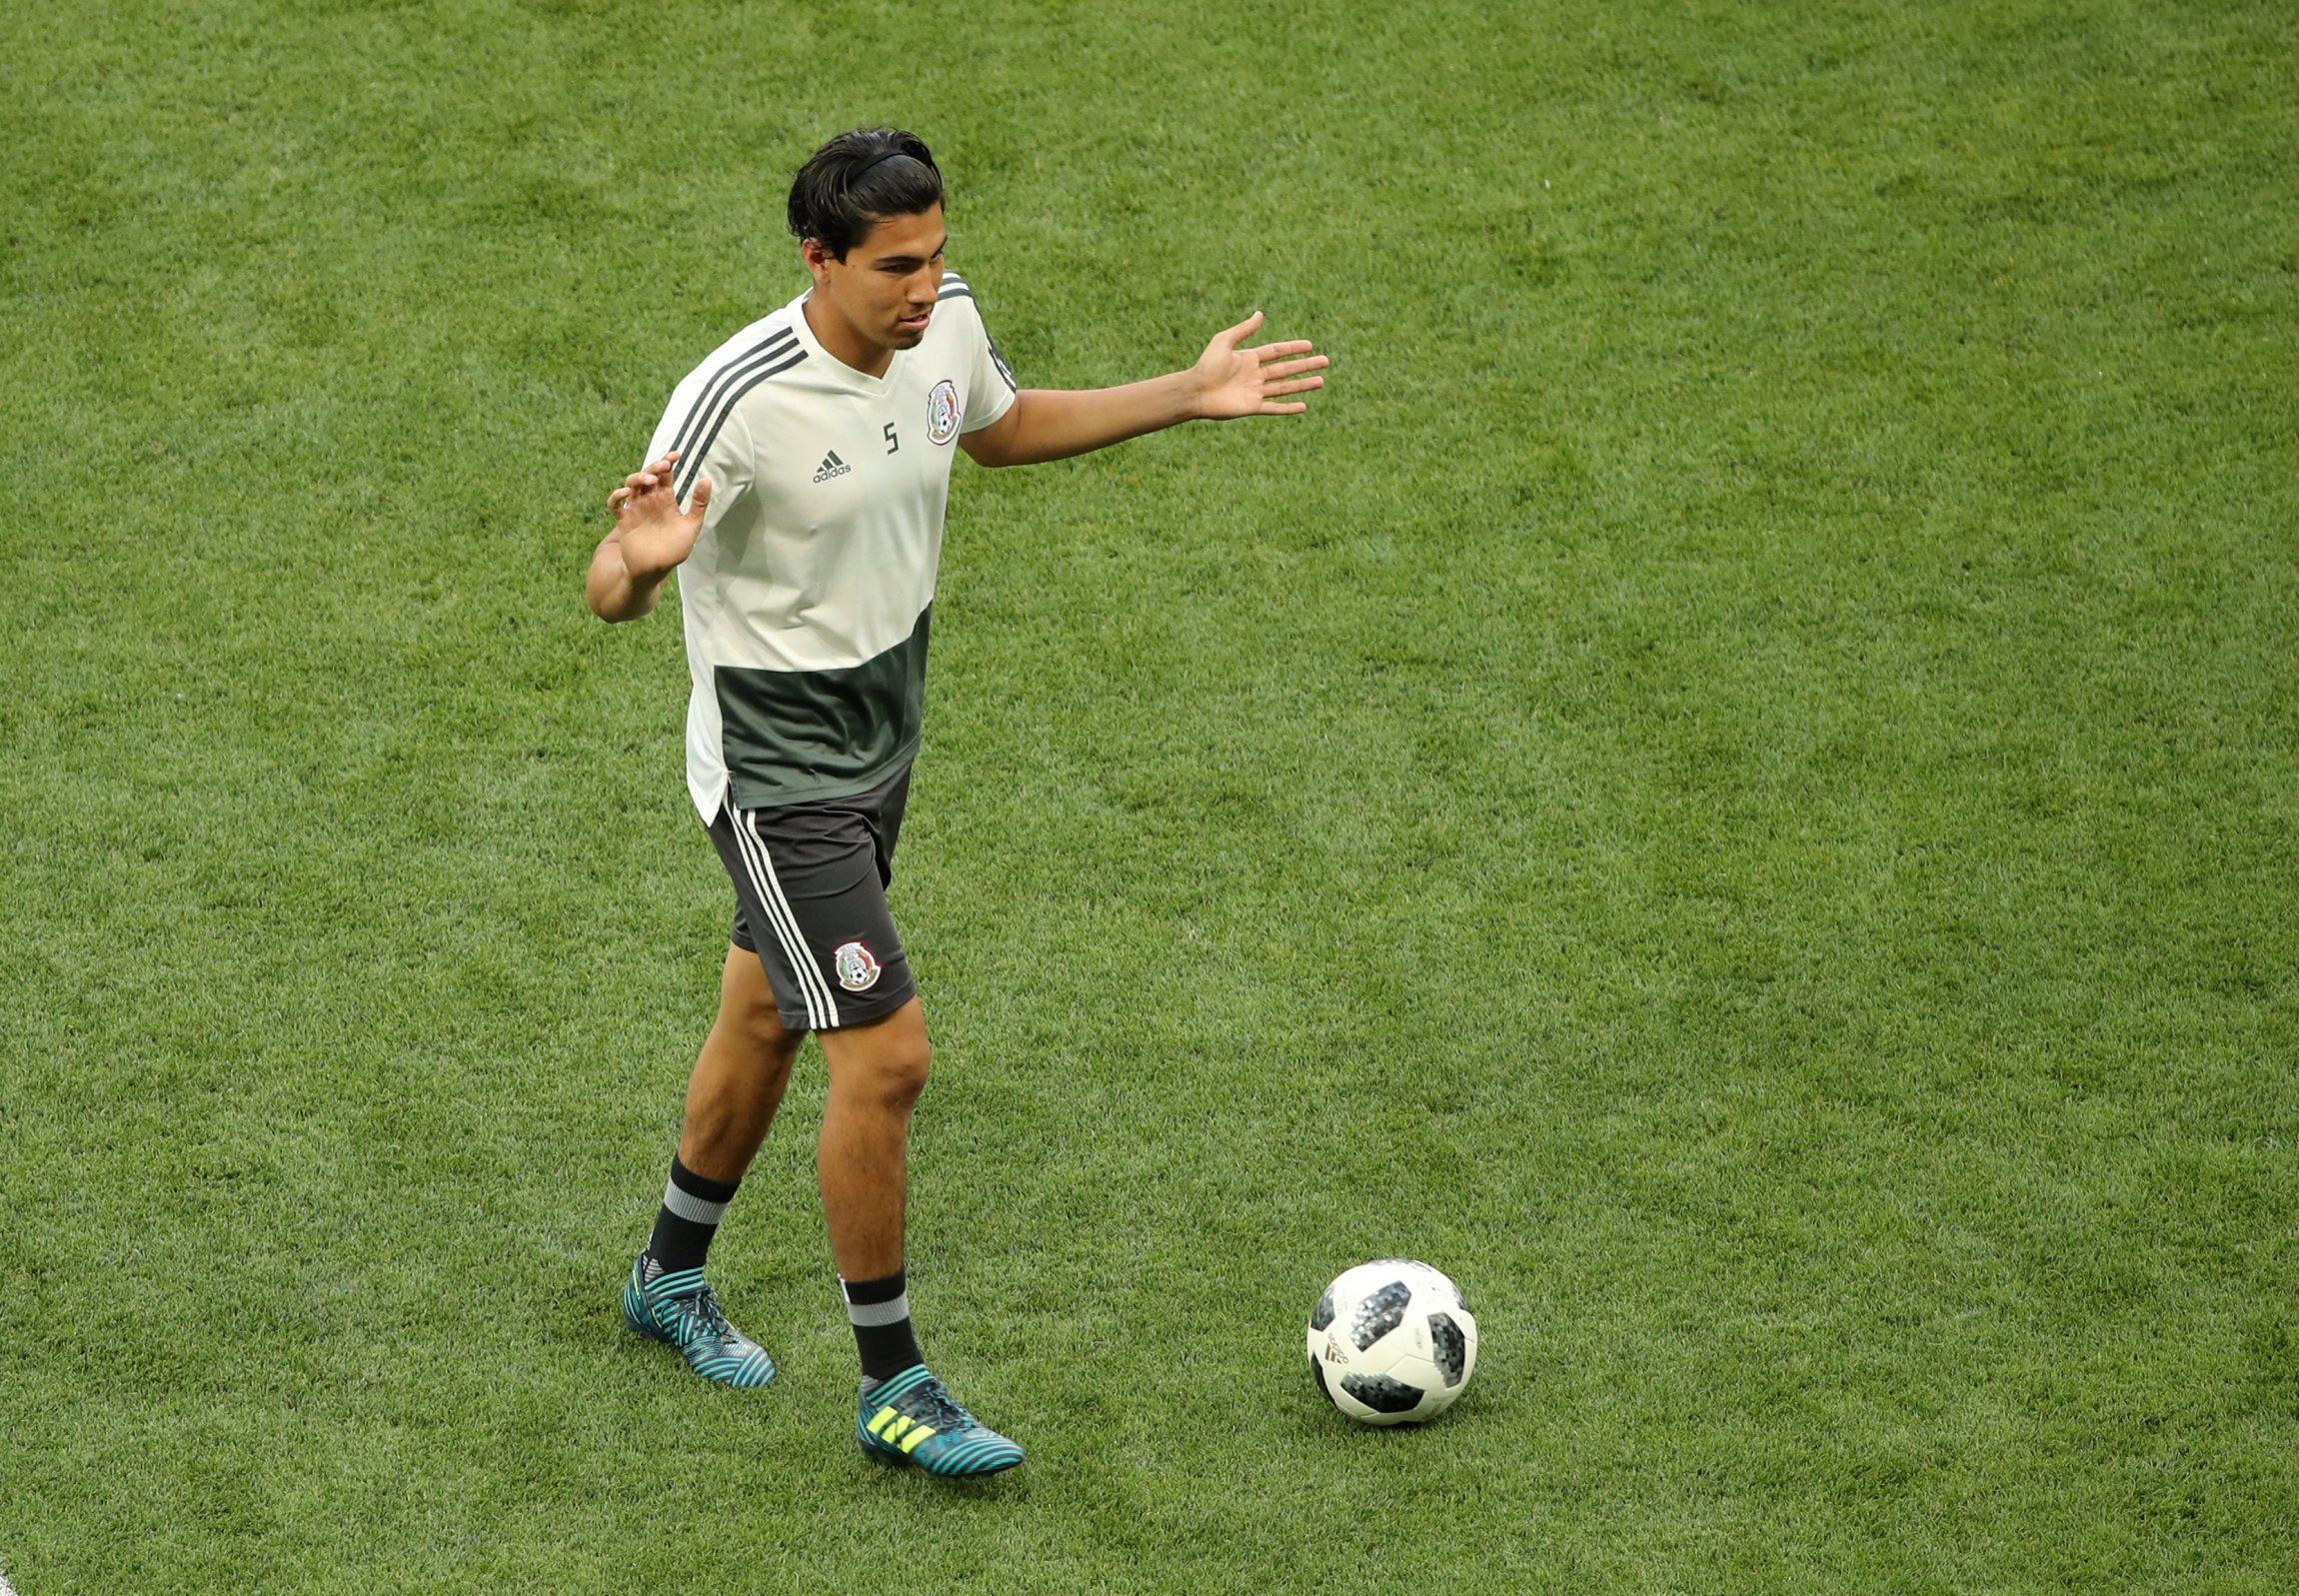 diego reyes dribbles the ball in mexico training